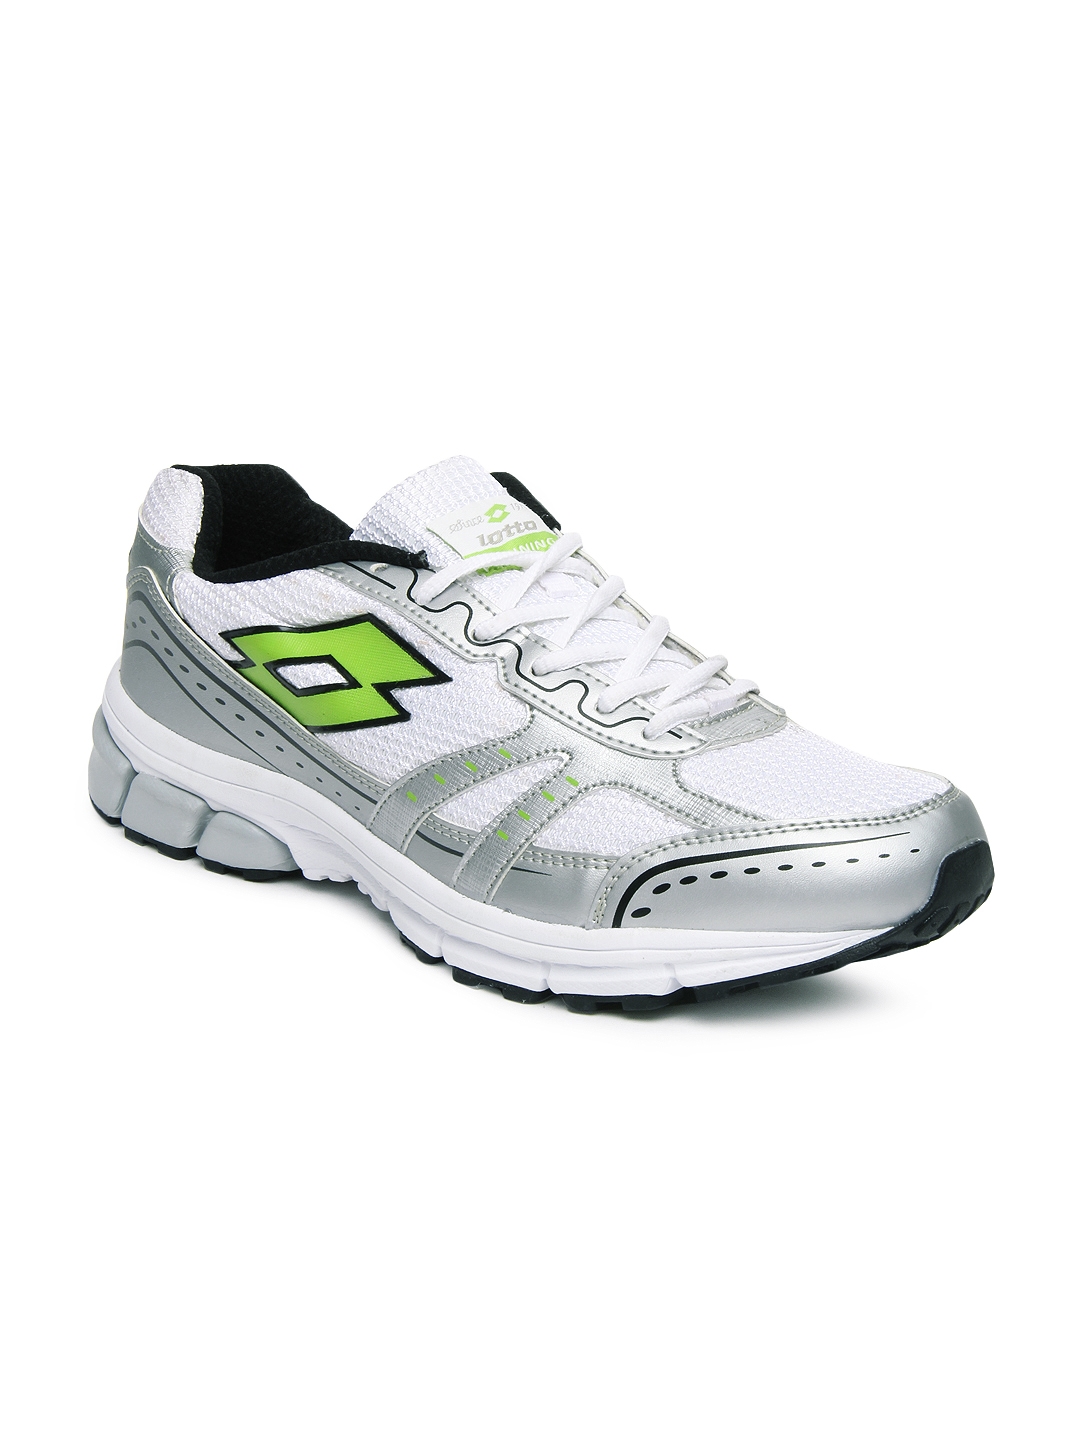 Lotto Sport Italia - Footwear, clothing and accessories for sport and  leisure time.